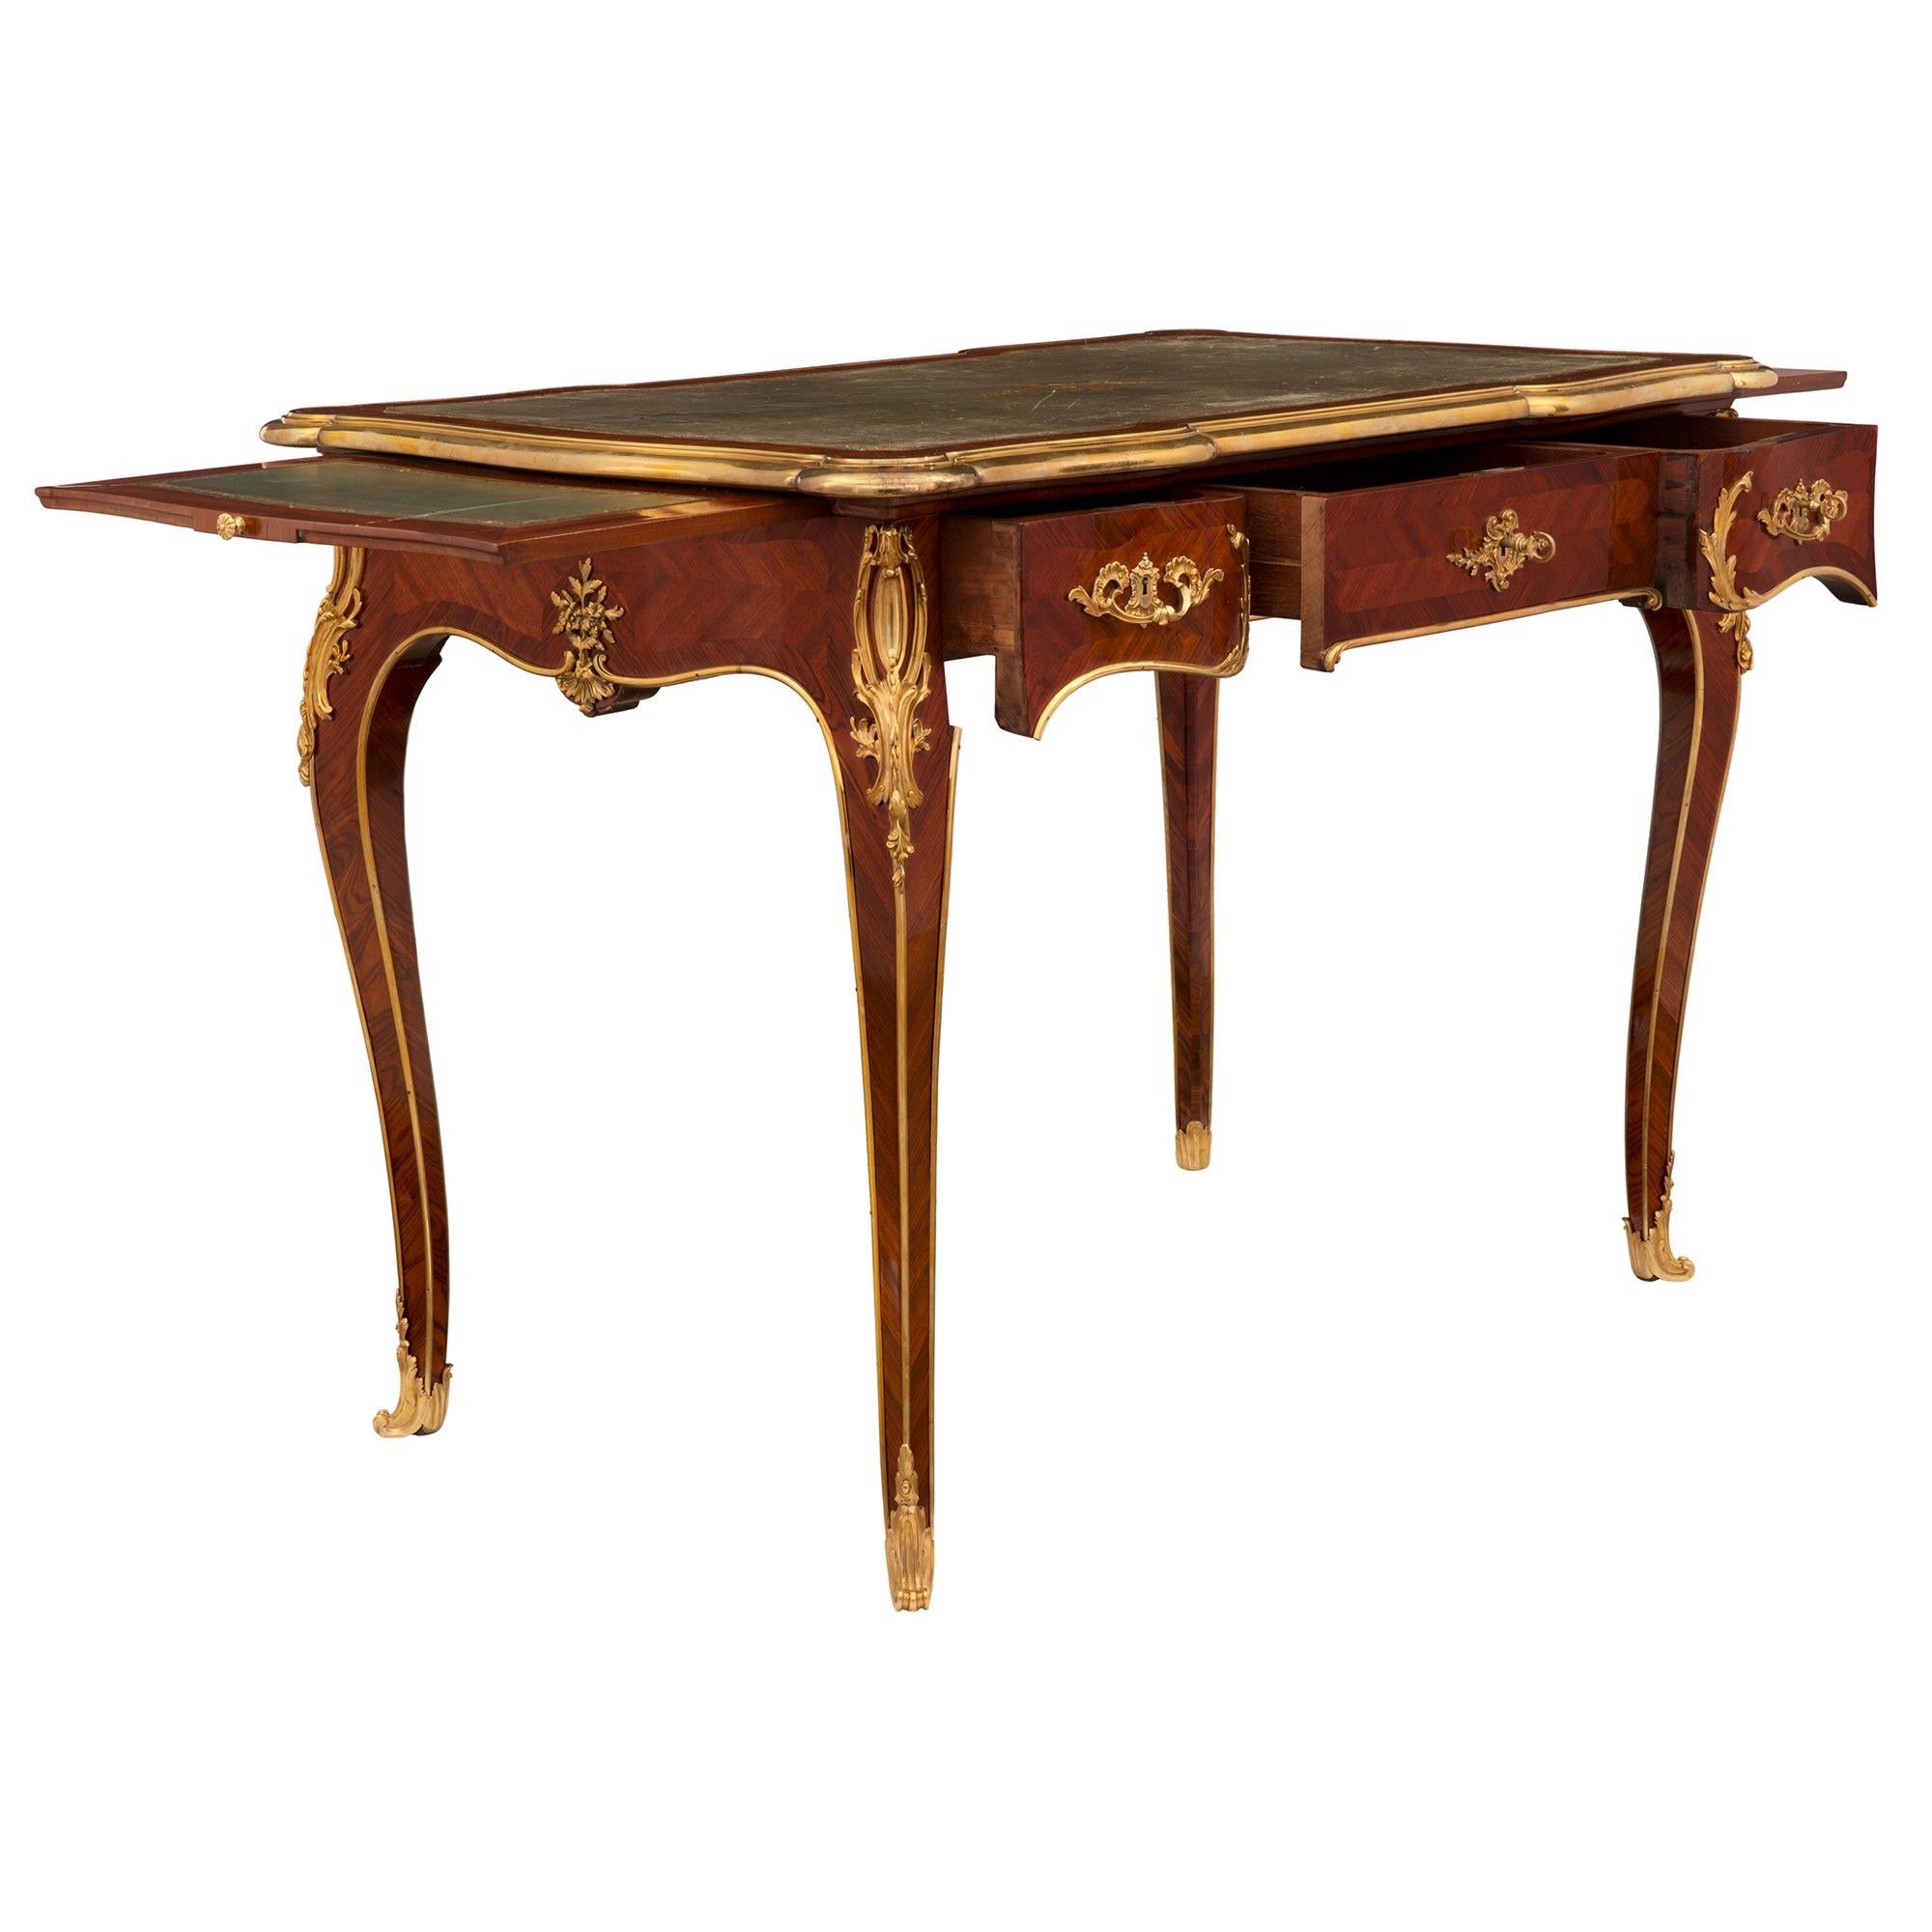 French Mid-19th Century Louis XV Style Kingwood and Ormolu Bureau Plat For Sale 1